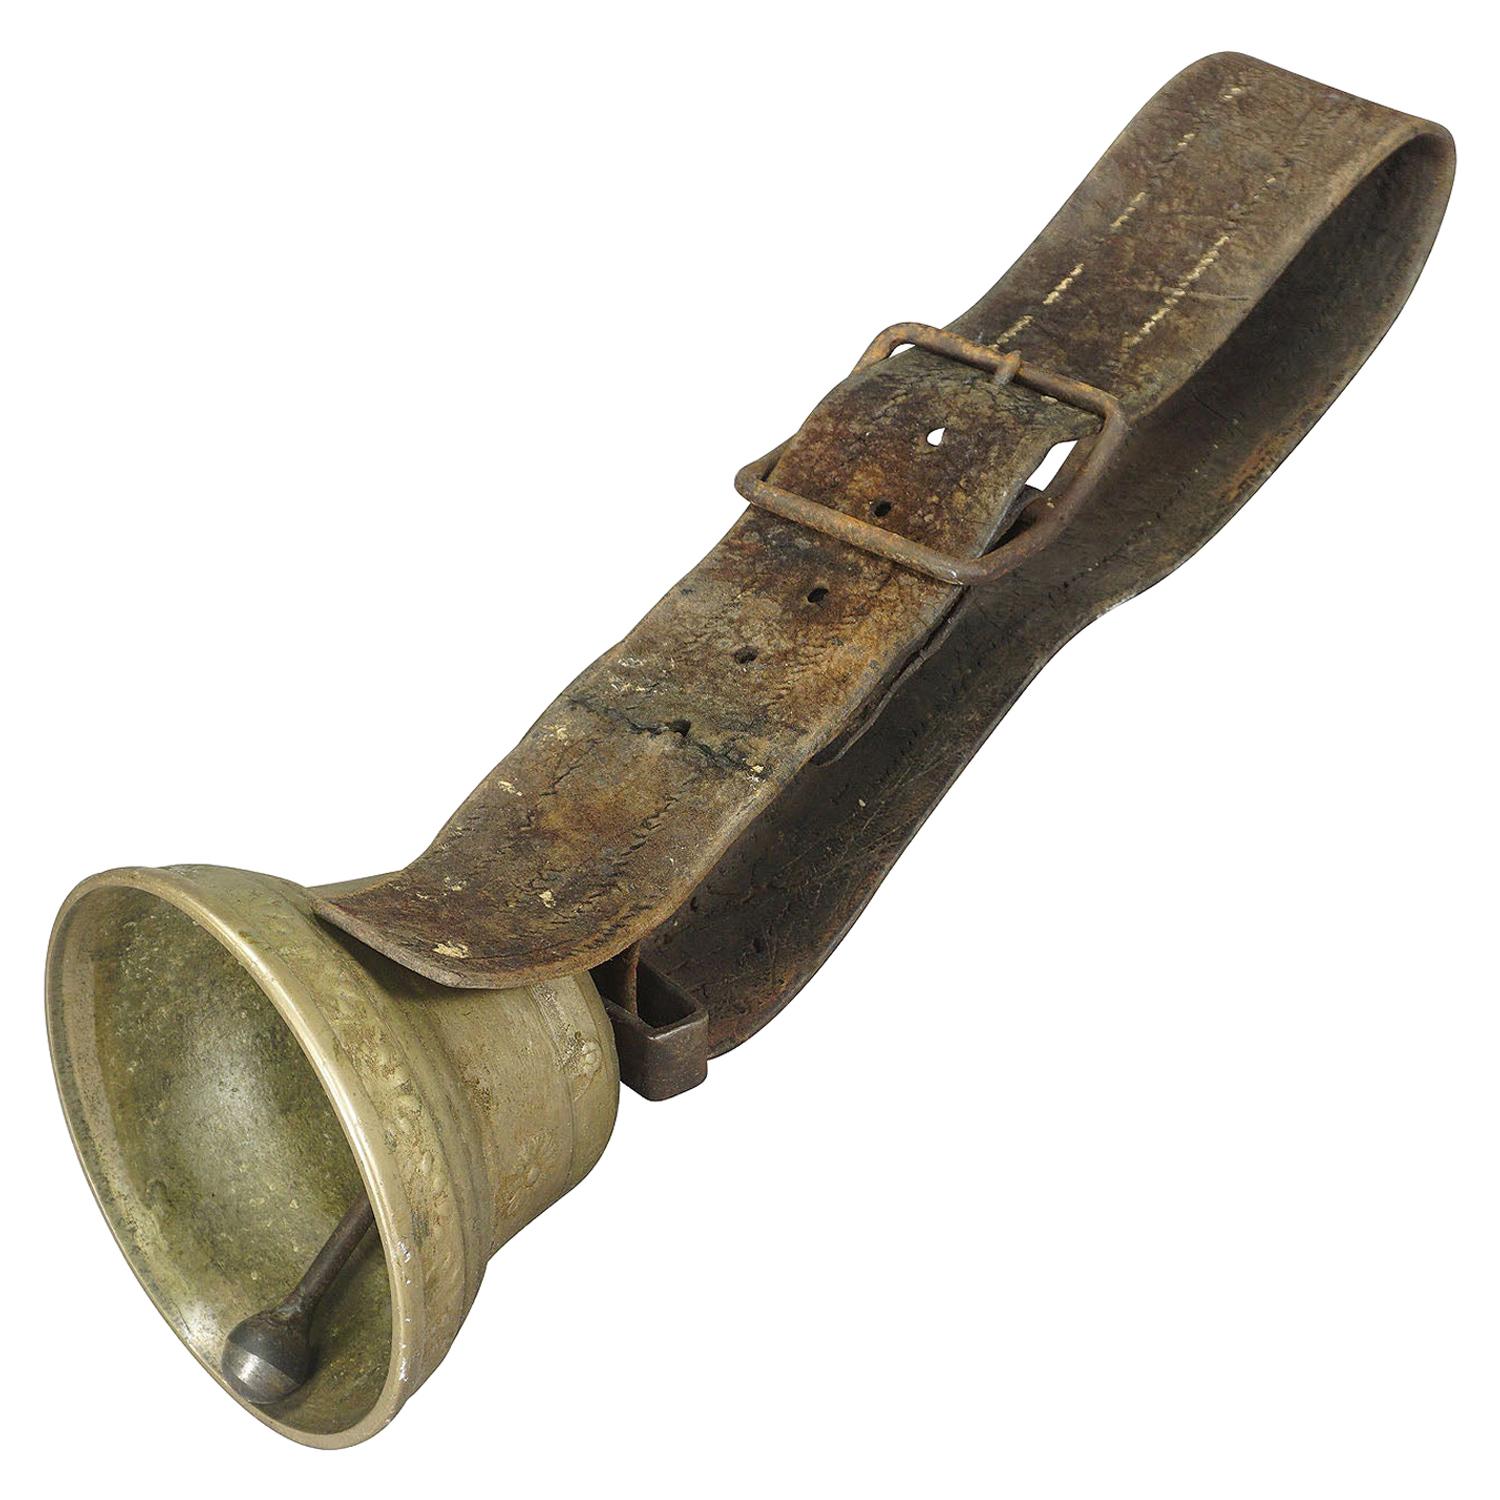 Casted Bronze Cow Bell with Leather Strap, Switzerland, Ca. 1900